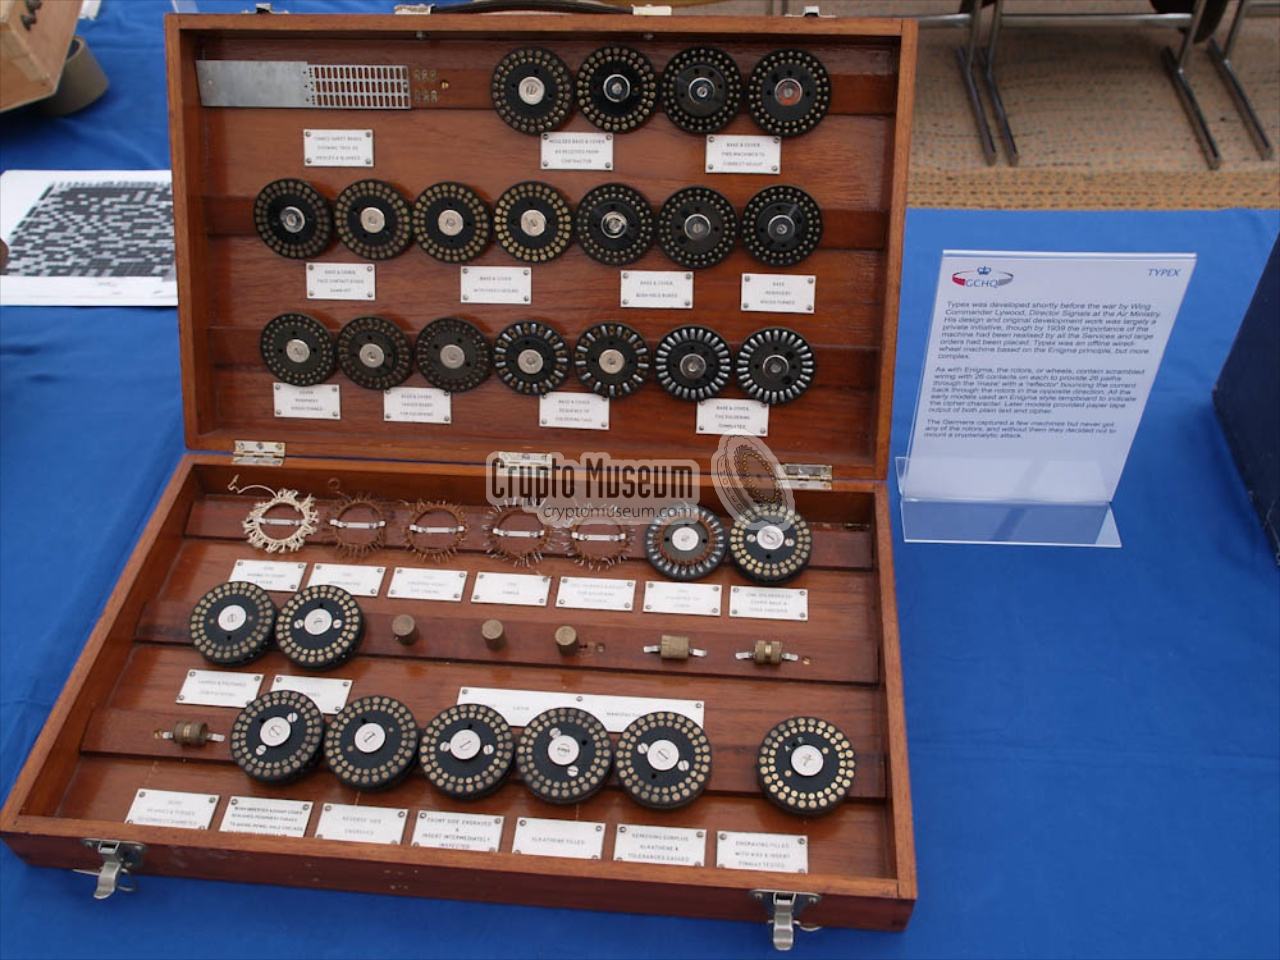 Typex wheel cores displayed by CGHQ in 2009. Photograph courtsey Kevin Coleman [2].